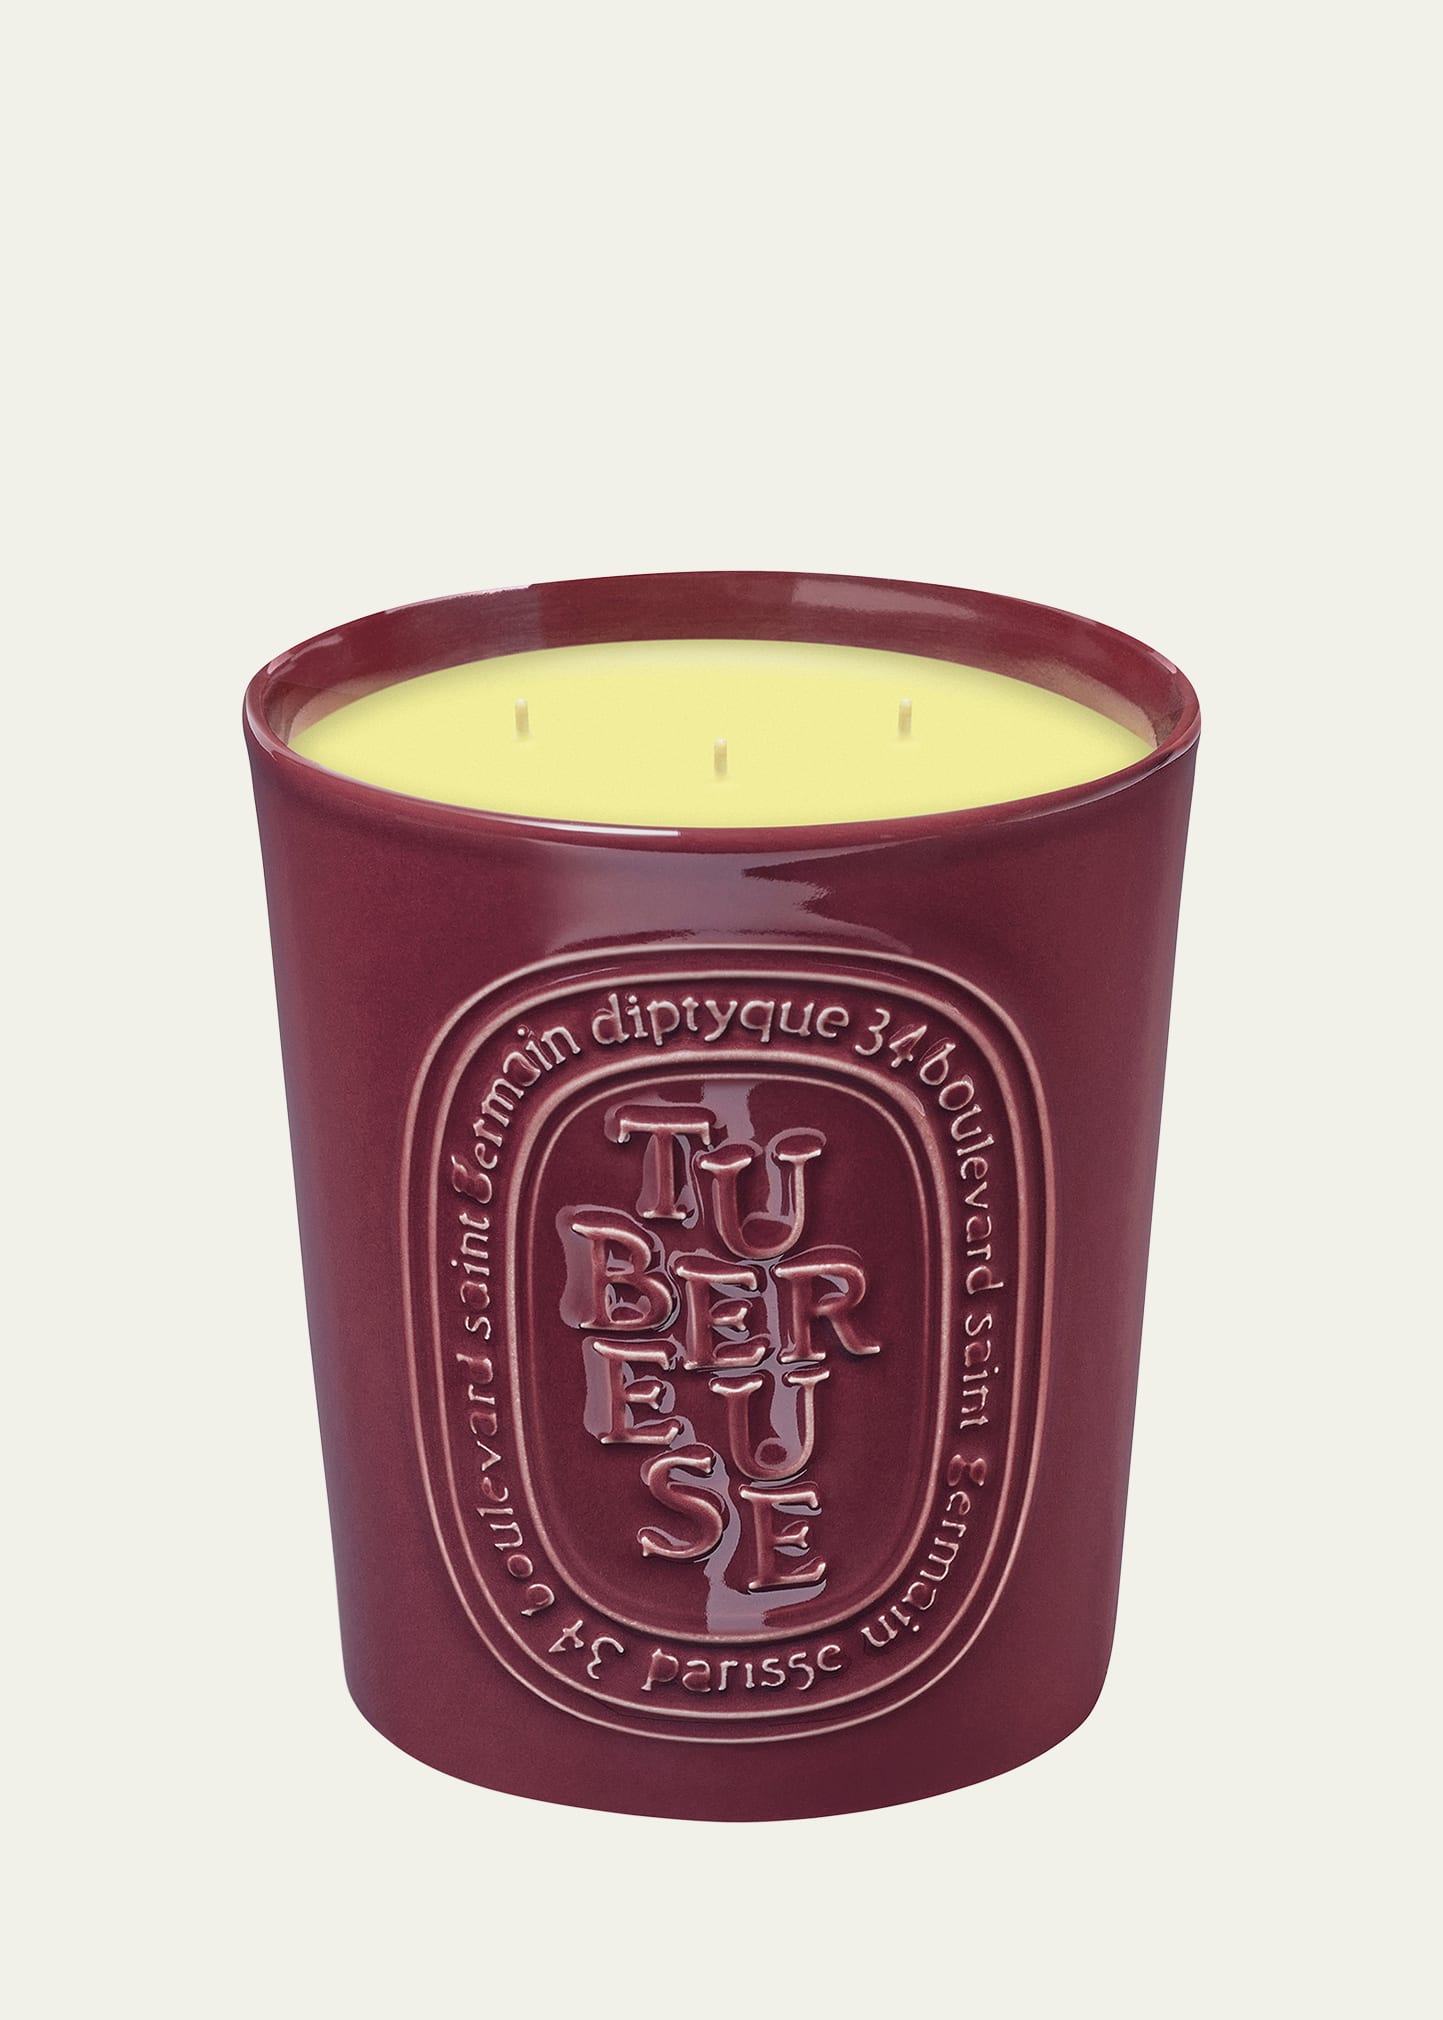 Diptyque Tubereuse Scented Candle, 21.2 Oz.